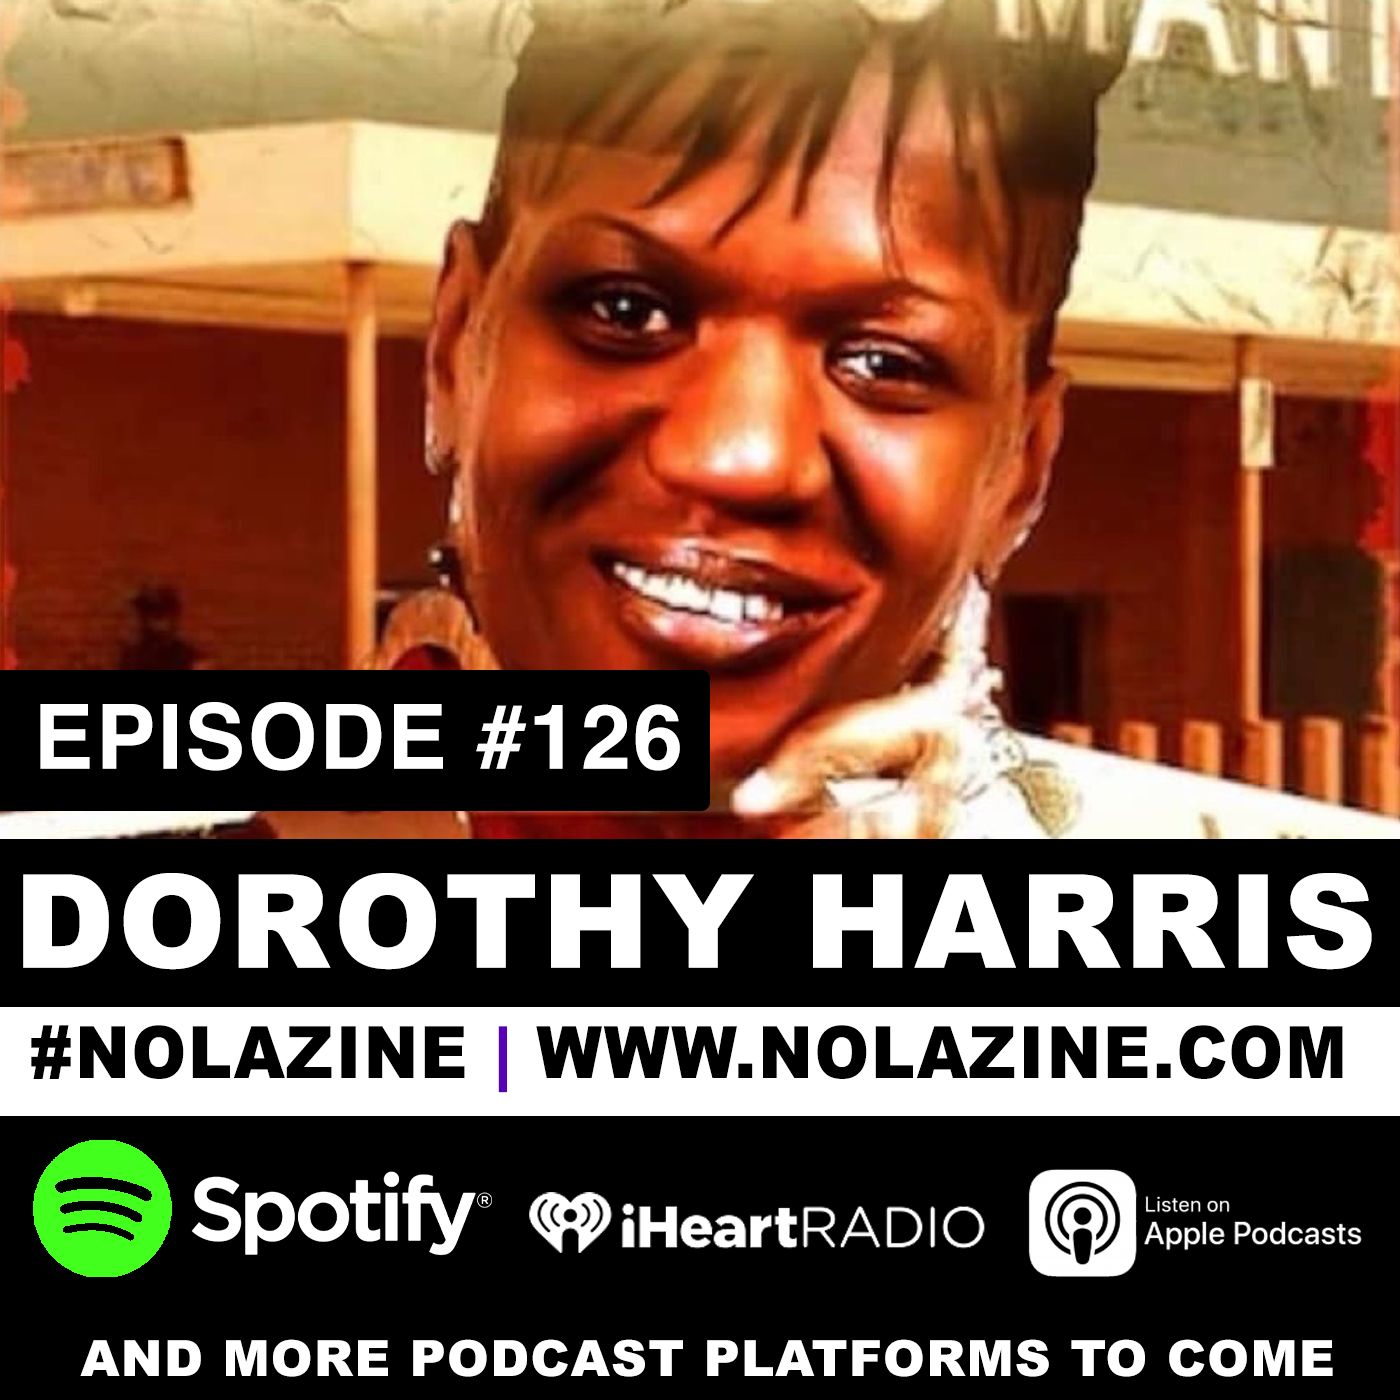 EP: 126 Featuring Dorothy Harris